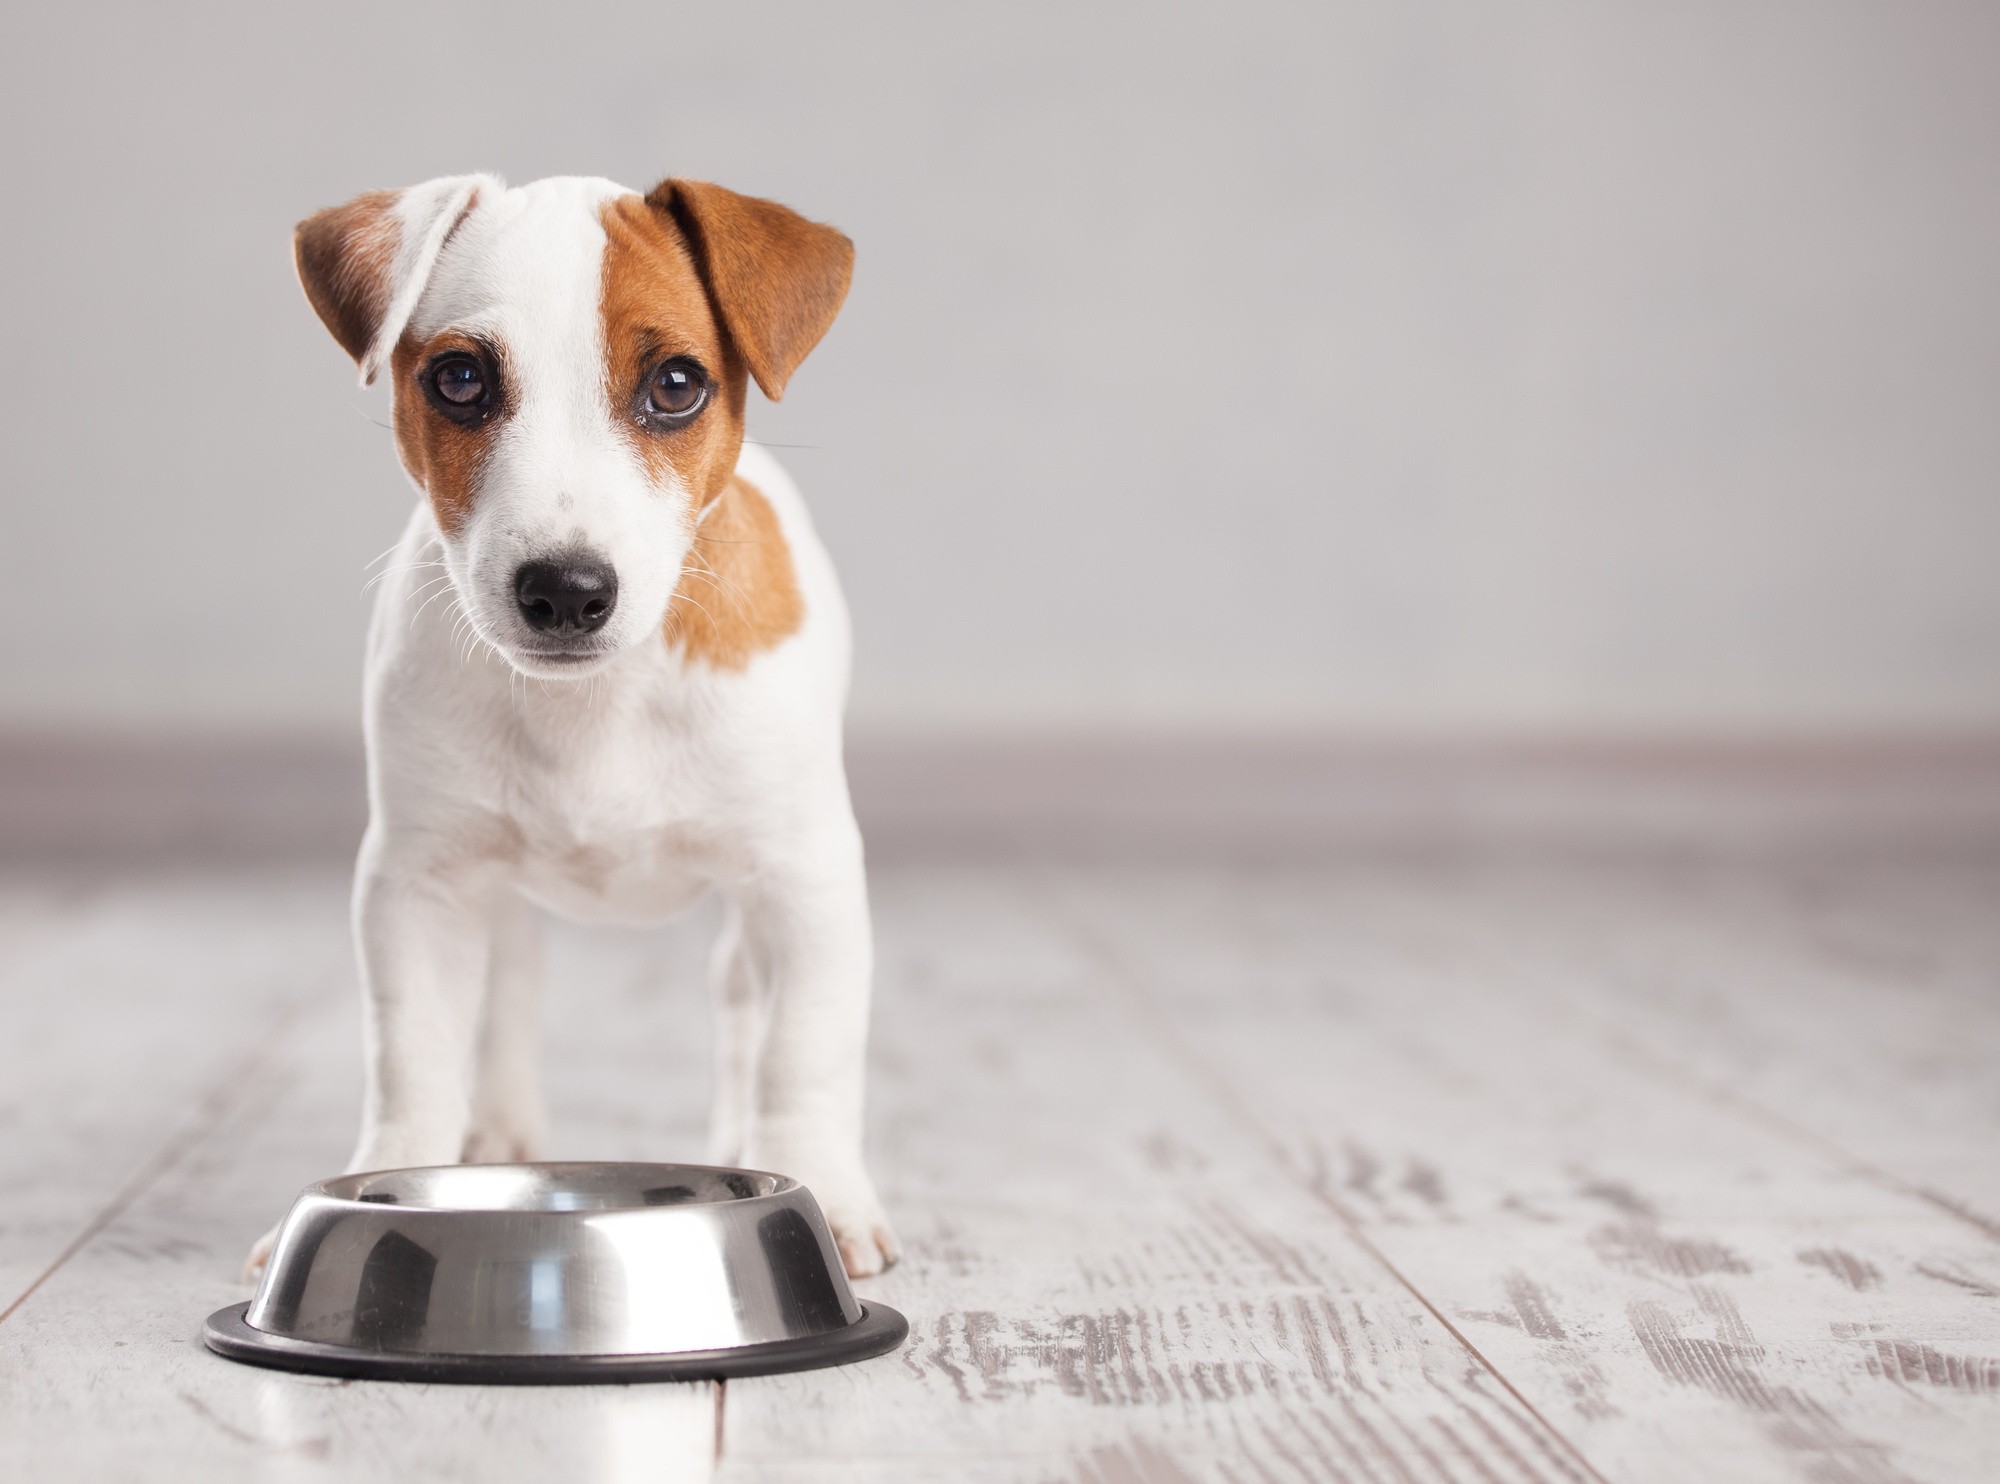 Should You Allow Pets in a Rental Property?